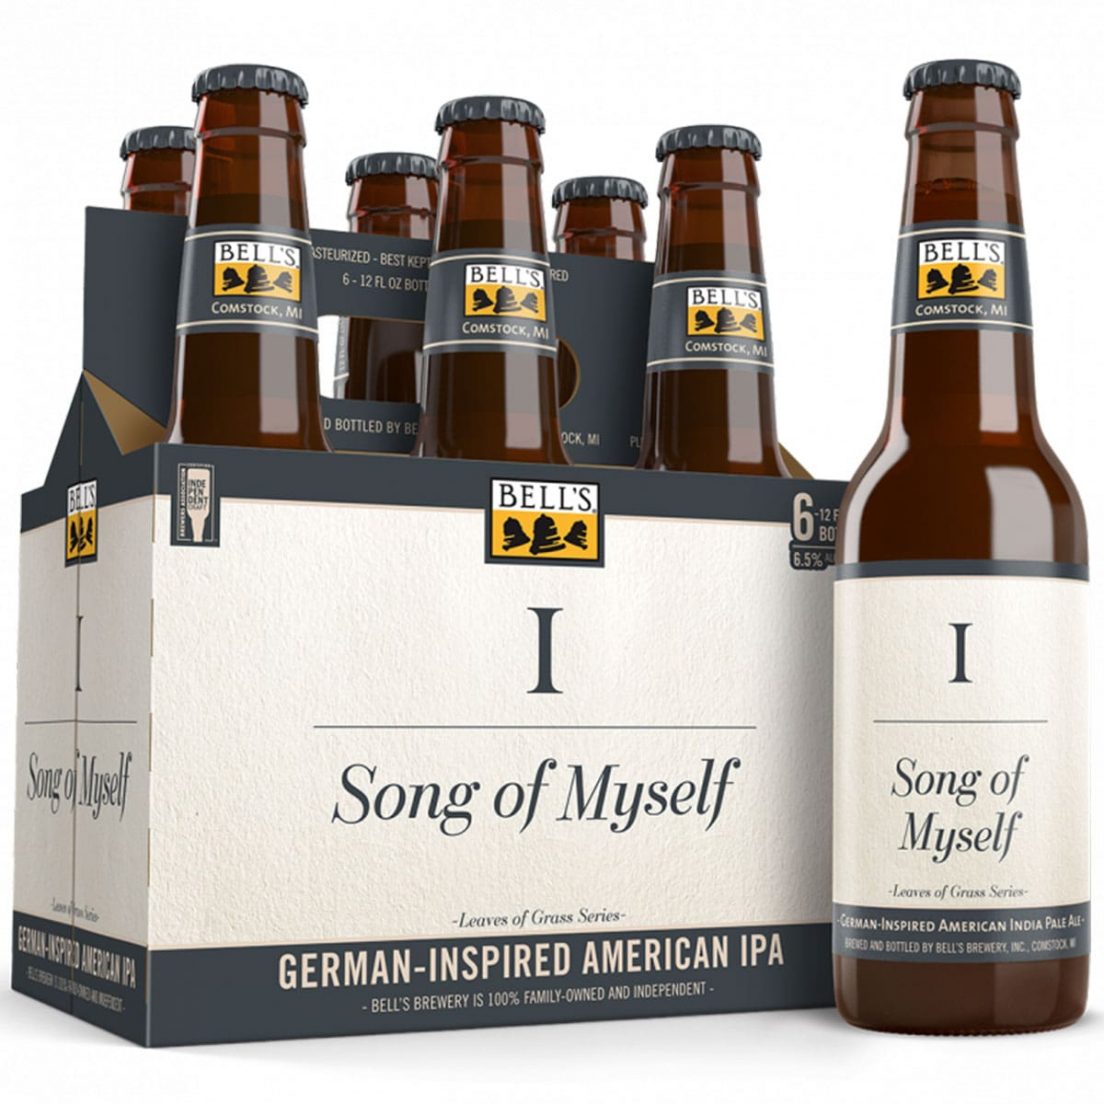 Bell's Song of Myself IPA